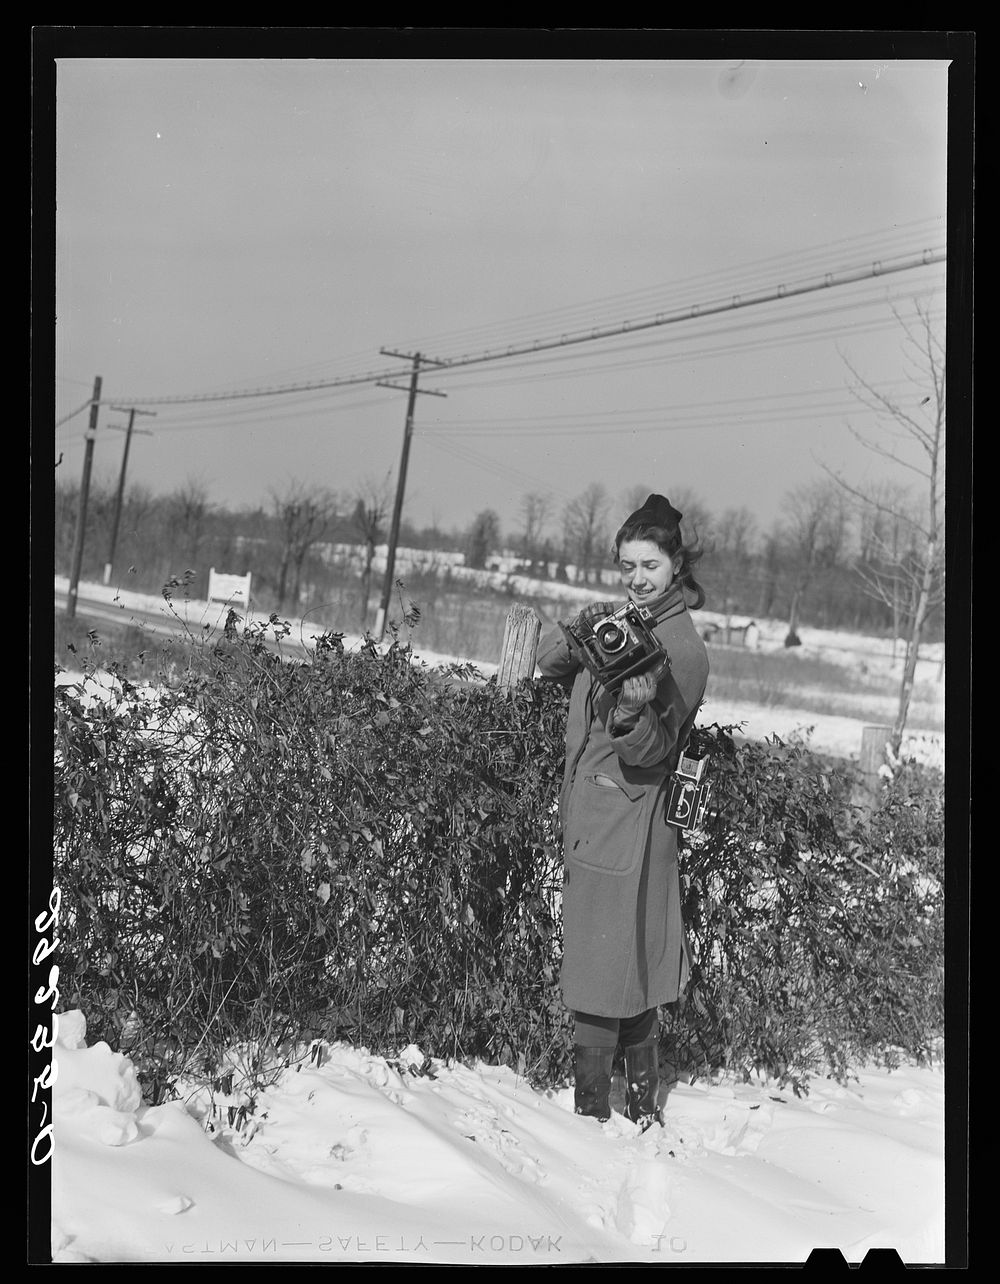 [Untitled photo, possibly related to: Untitled negative showing Marion Post Wolcott standing in snow with cameras]. Sourced…